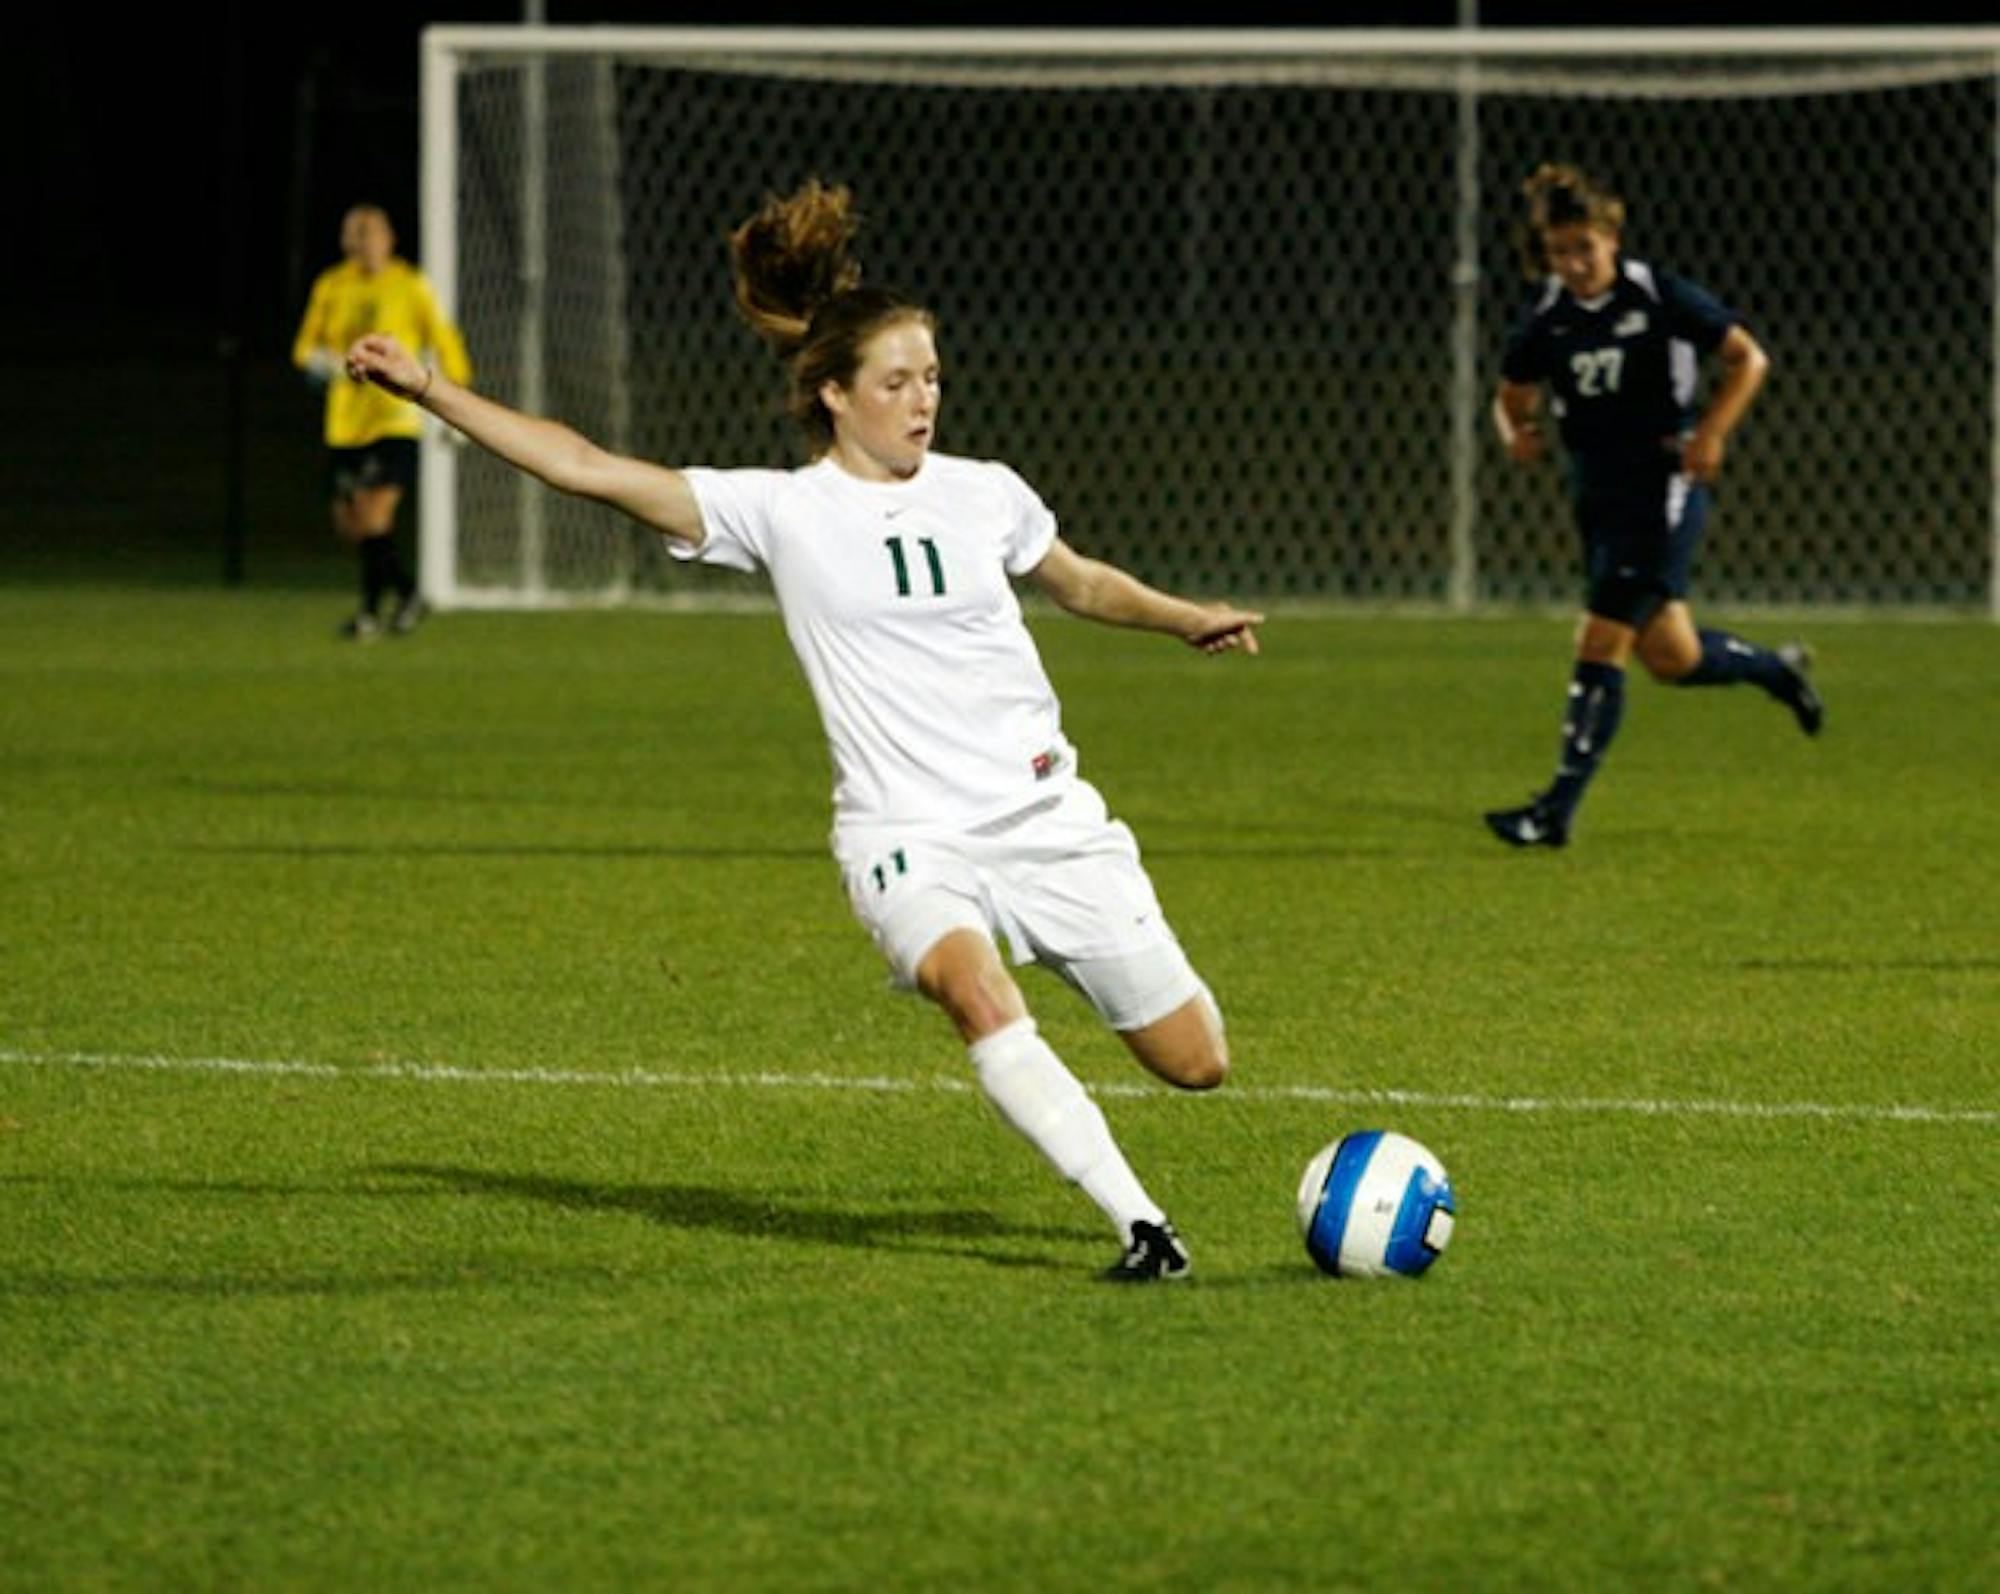 Alexis Euwema '11 and the Big Green women (2-7, 0-1 Ivy) fell to Princeton at home on Saturday, 2-1.